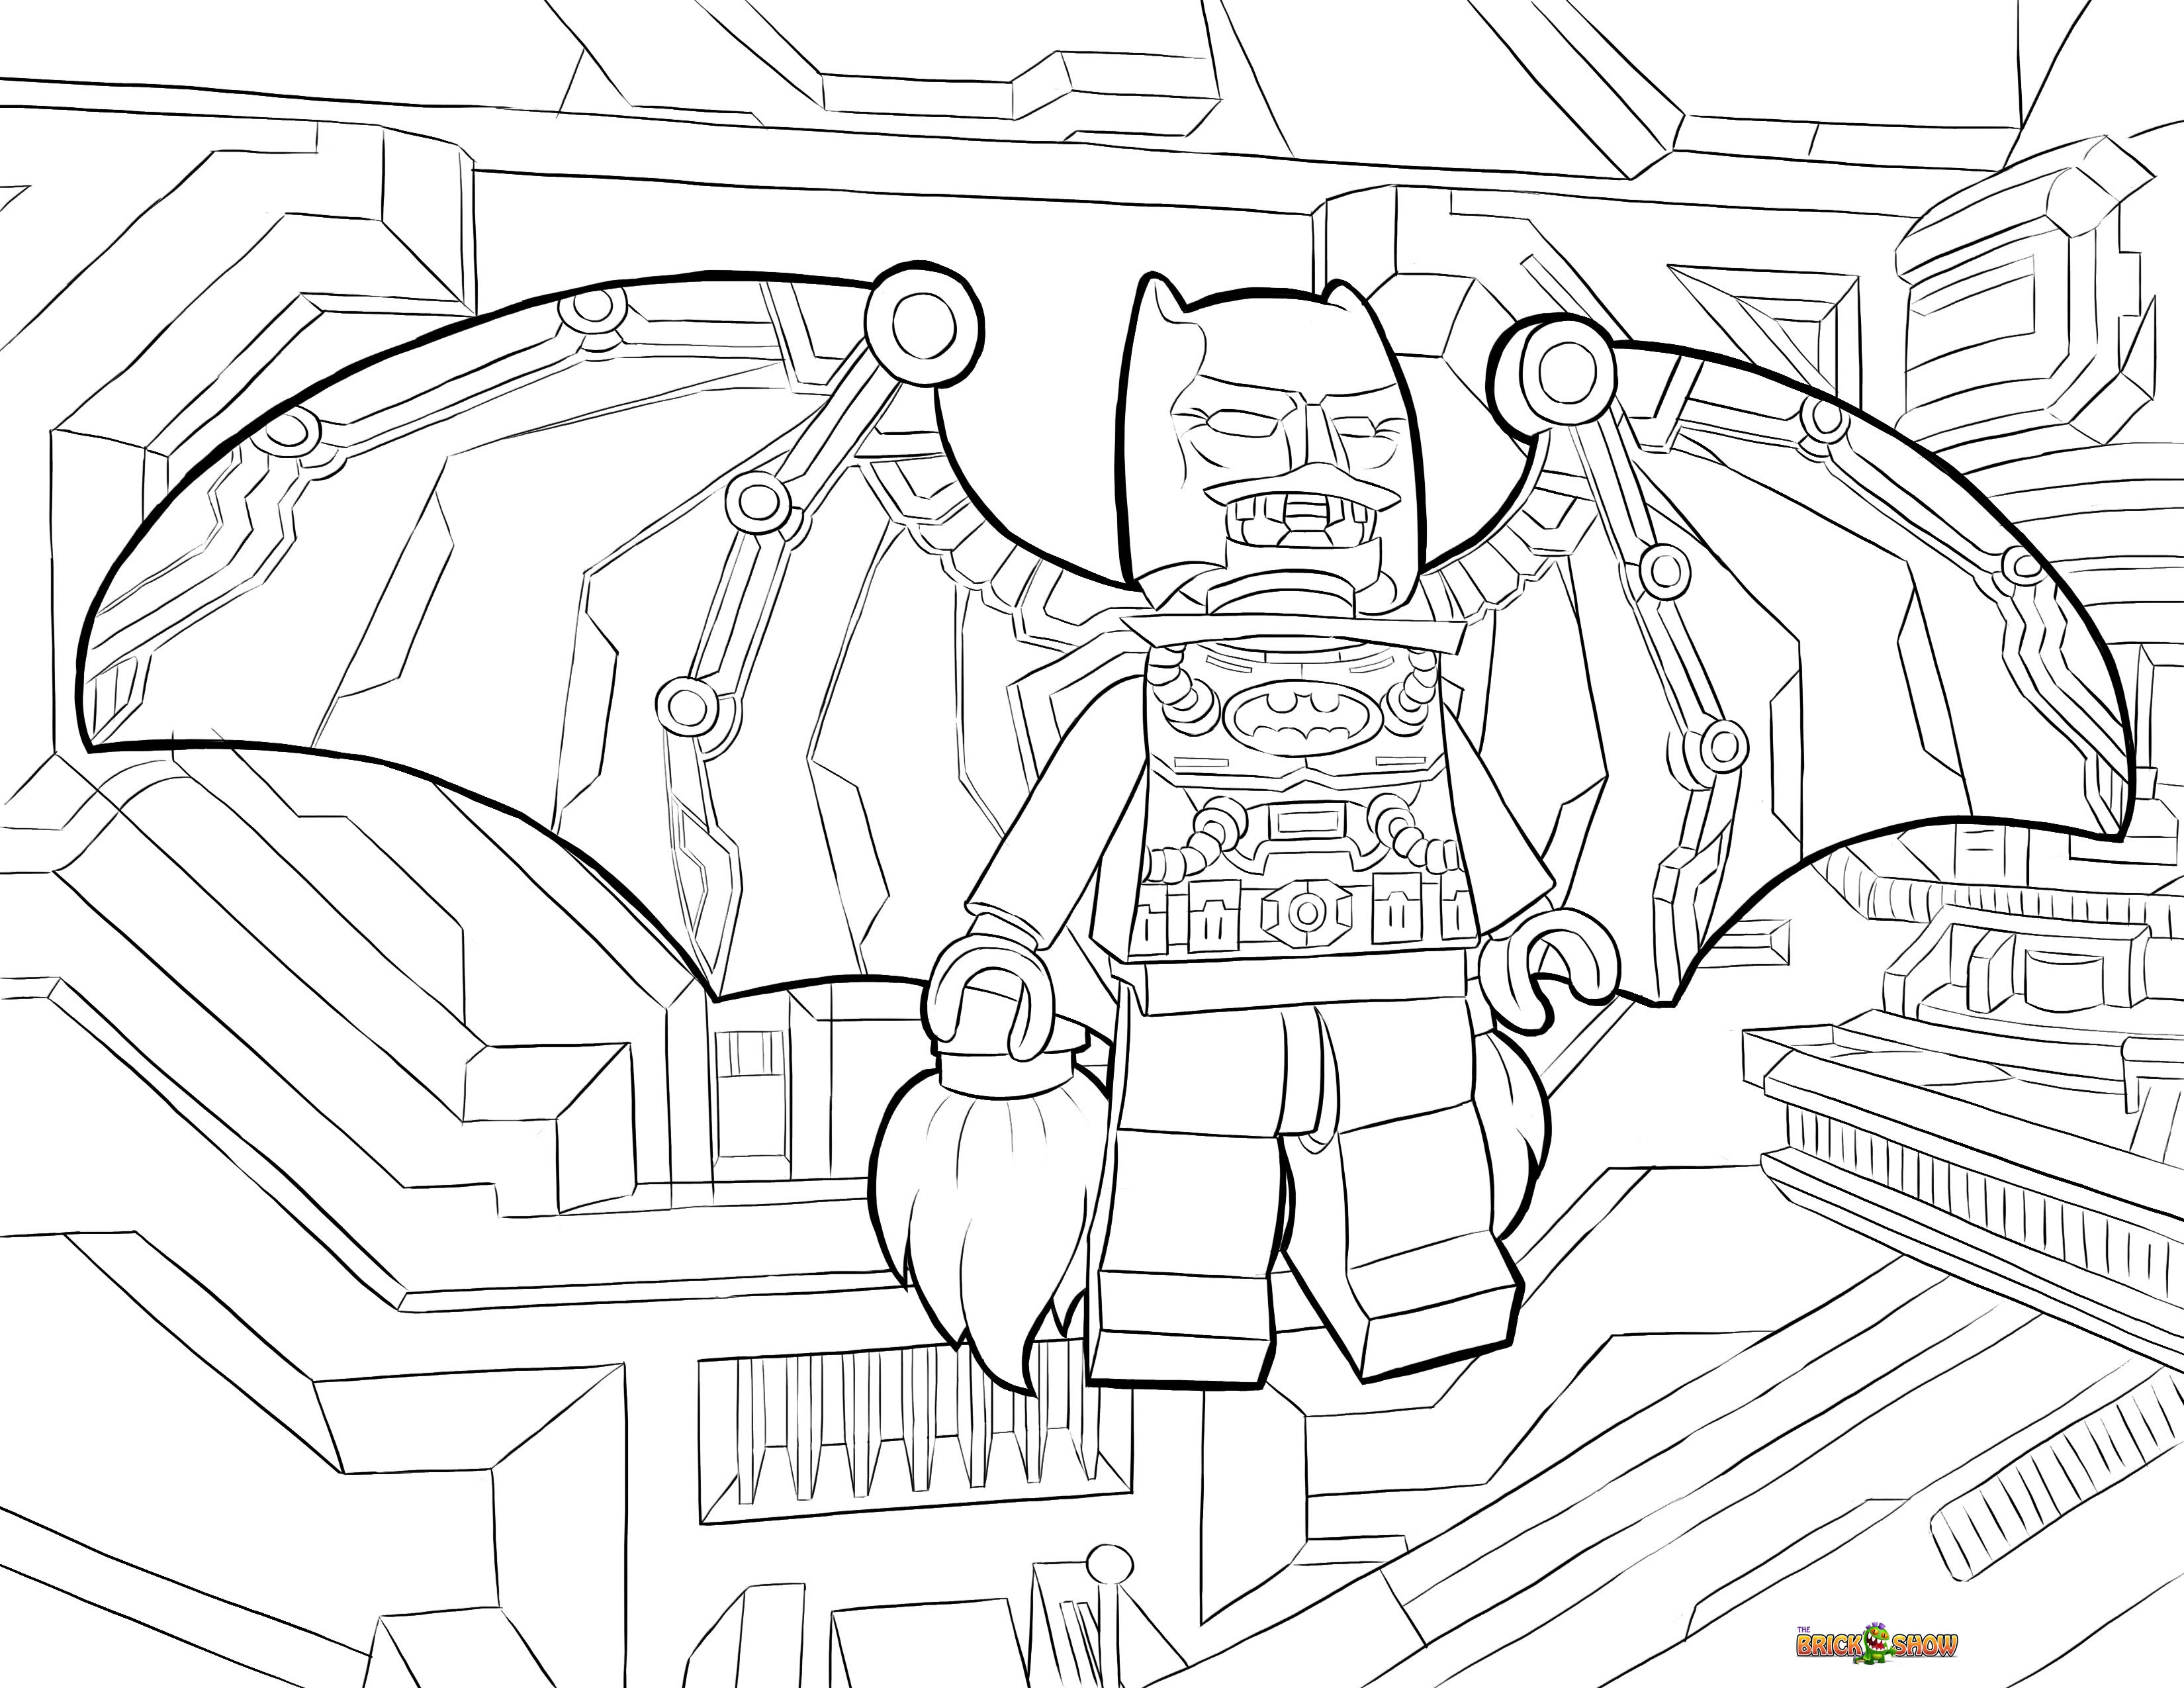 The battle to defeat the enemy and restore harmony to the lego universe takes emmet lucy batman and the rest of their friends to faraway unexplored worlds that test their courage and creativity. Free The Lego Batman Movie Coloring Pages Download Free Clip Art Free Clip Art On Clipart Library